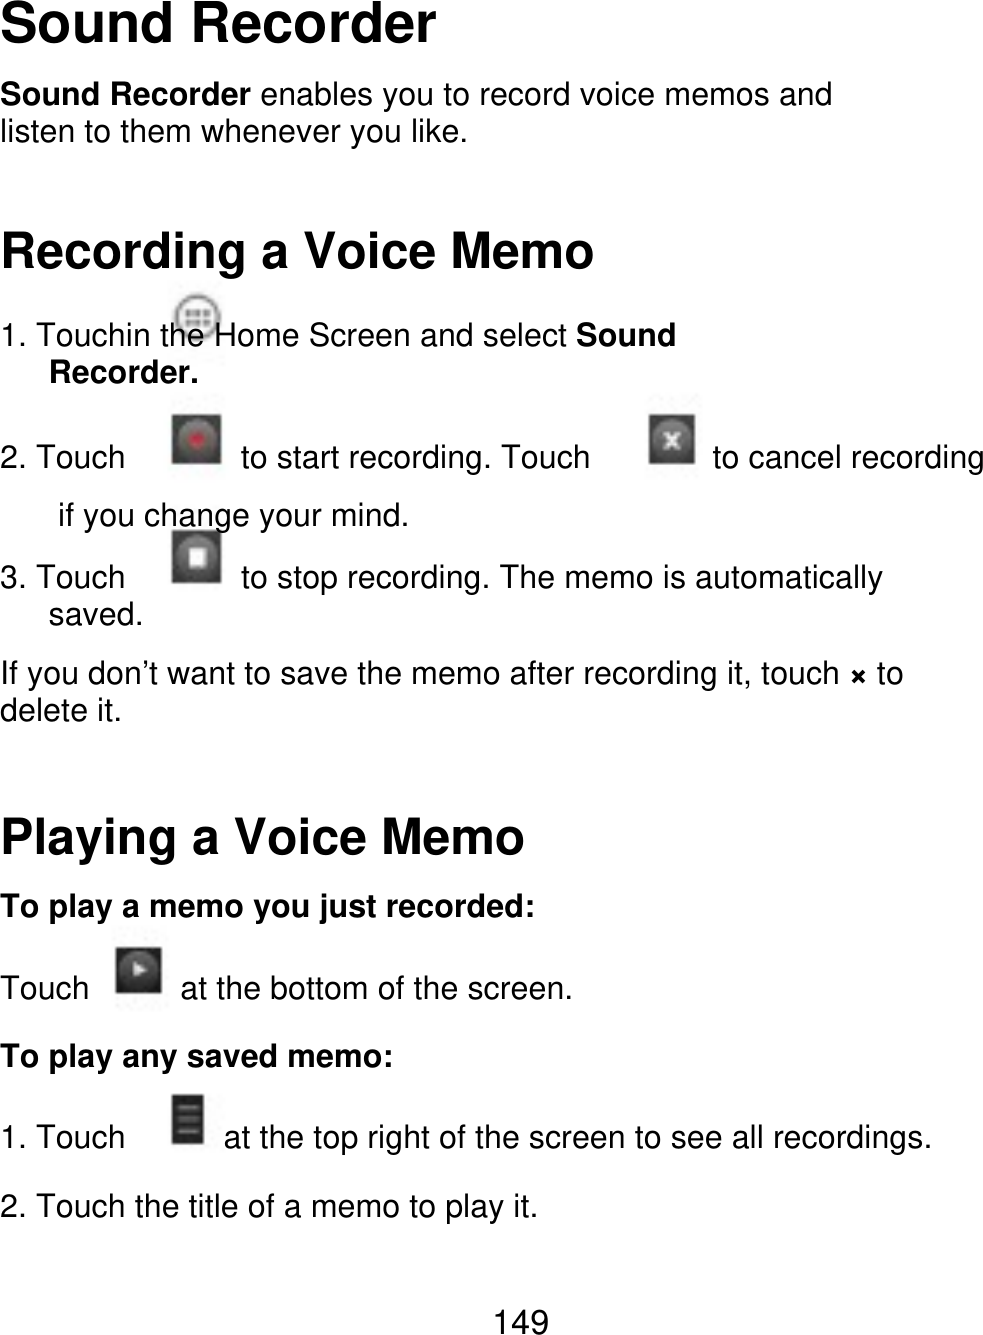 Sound Recorder Sound Recorder enables you to record voice memos and listen to them whenever you like. Recording a Voice Memo 1. Touchin the Home Screen and select Sound    Recorder. 2. Touch 3. Touch    saved. to start recording. Touch to cancel recording if you change your mind. to stop recording. The memo is automatically If you don’t want to save the memo after recording it, touch × to delete it. Playing a Voice Memo To play a memo you just recorded: Touch at the bottom of the screen. To play any saved memo: 1. Touch at the top right of the screen to see all recordings. 2. Touch the title of a memo to play it. 149 